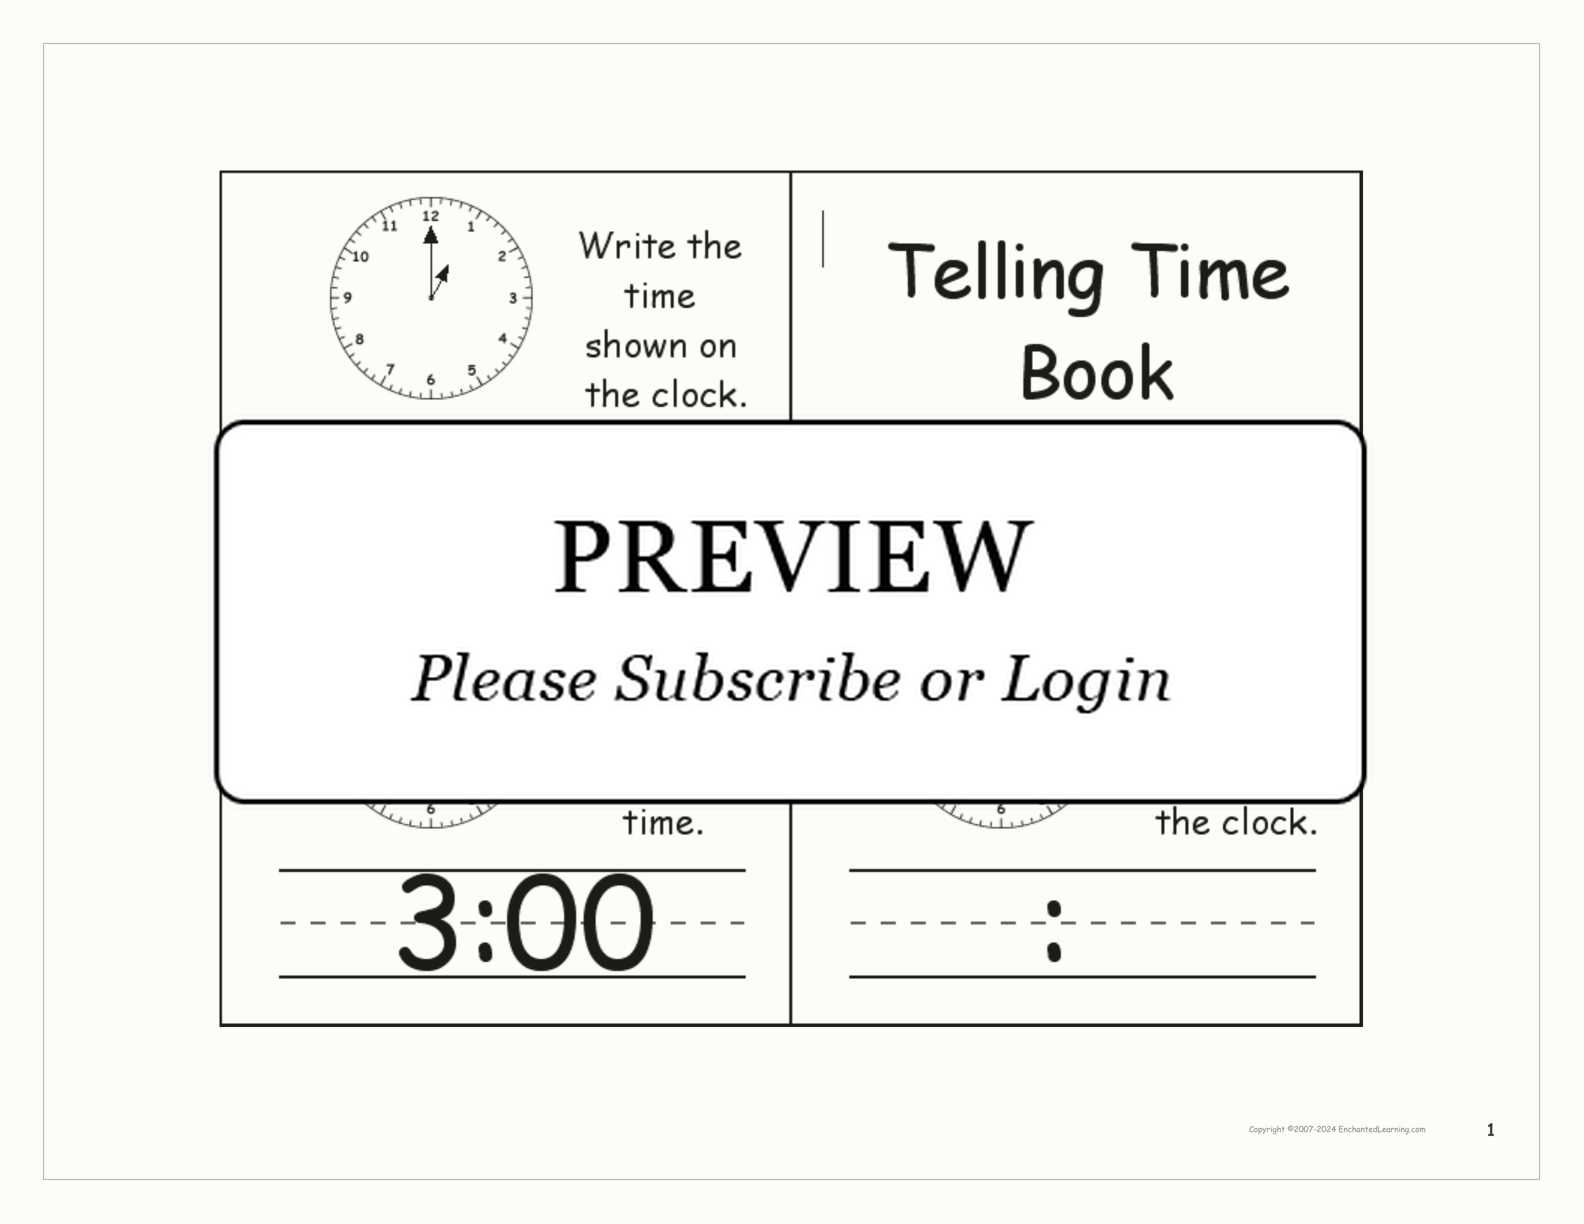 Telling Time Book interactive printout page 1